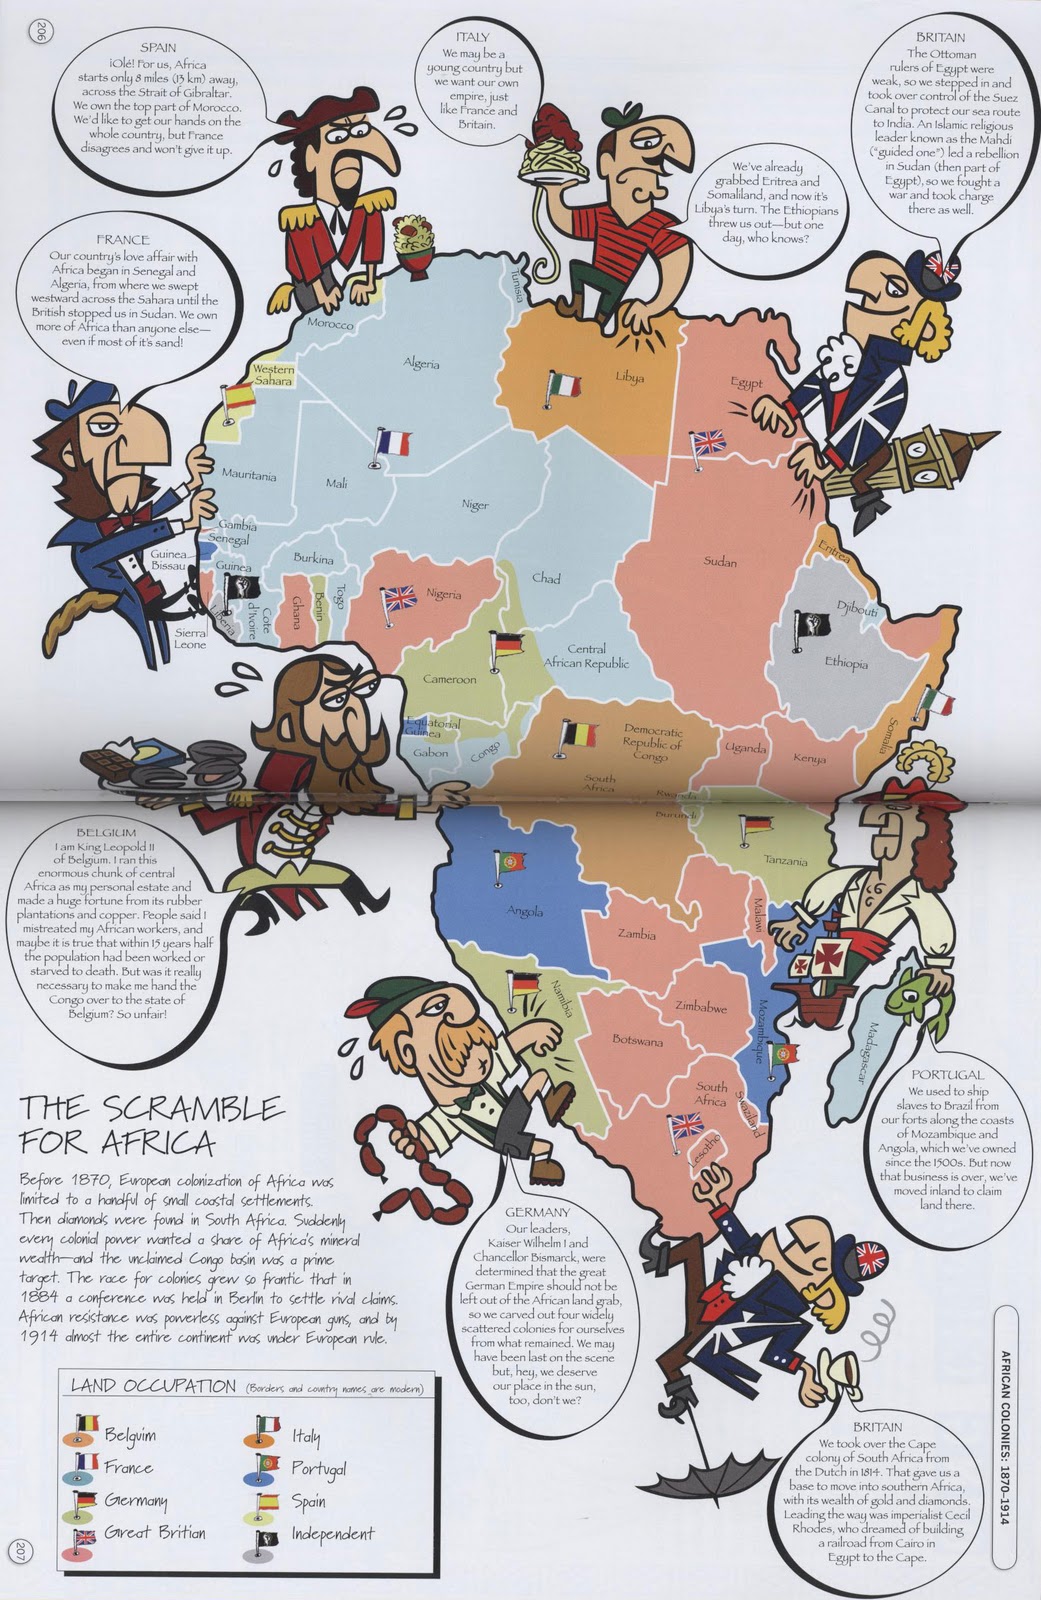 The scramble for africa